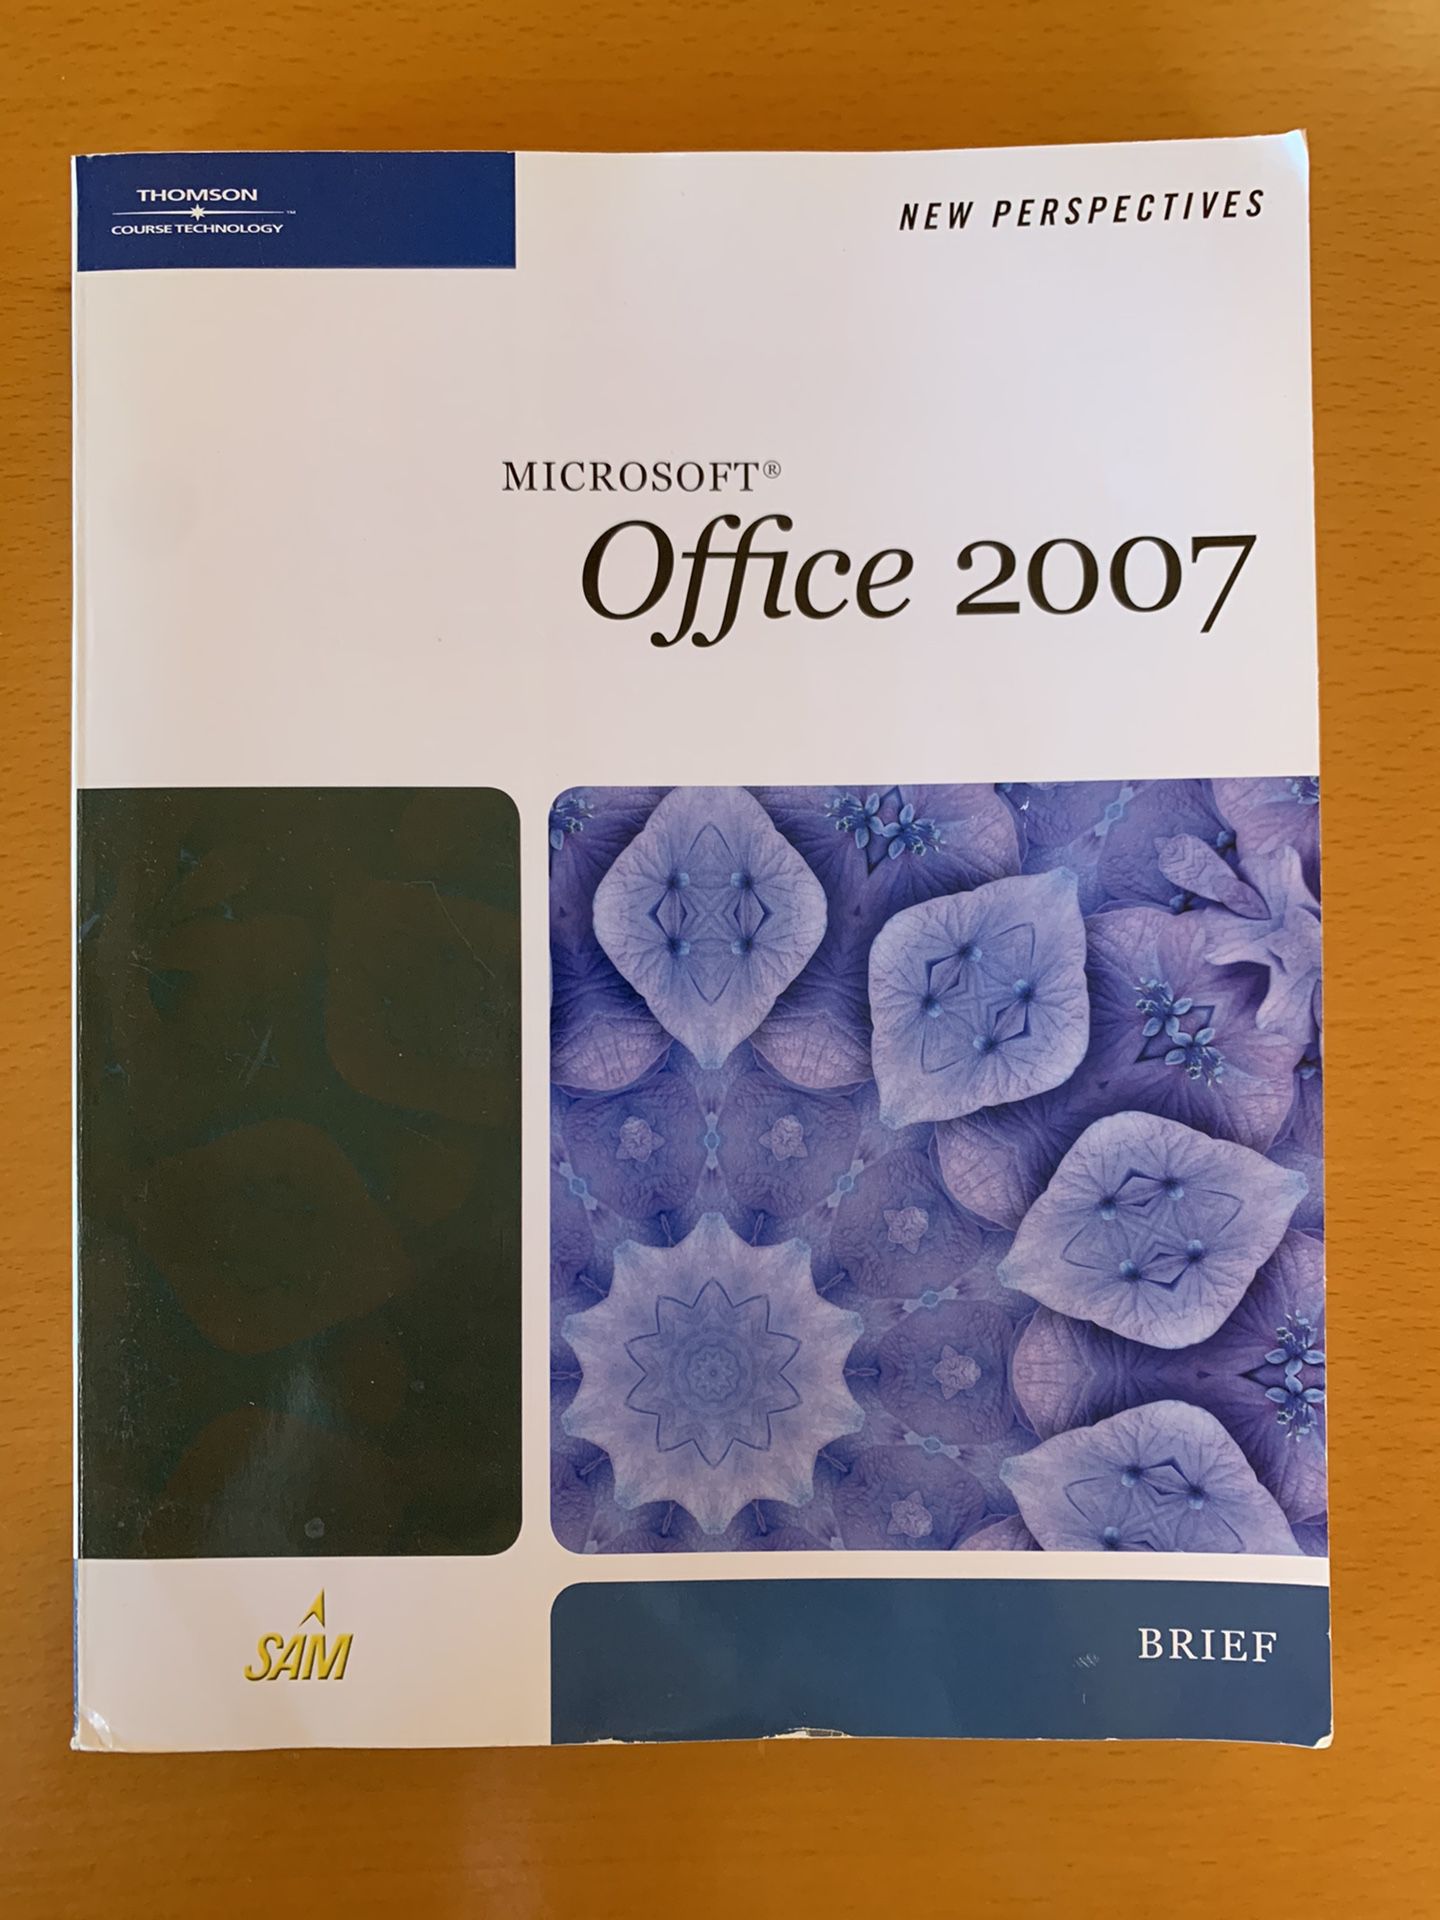 Microsoft Office 2007 New Perspectives Brief